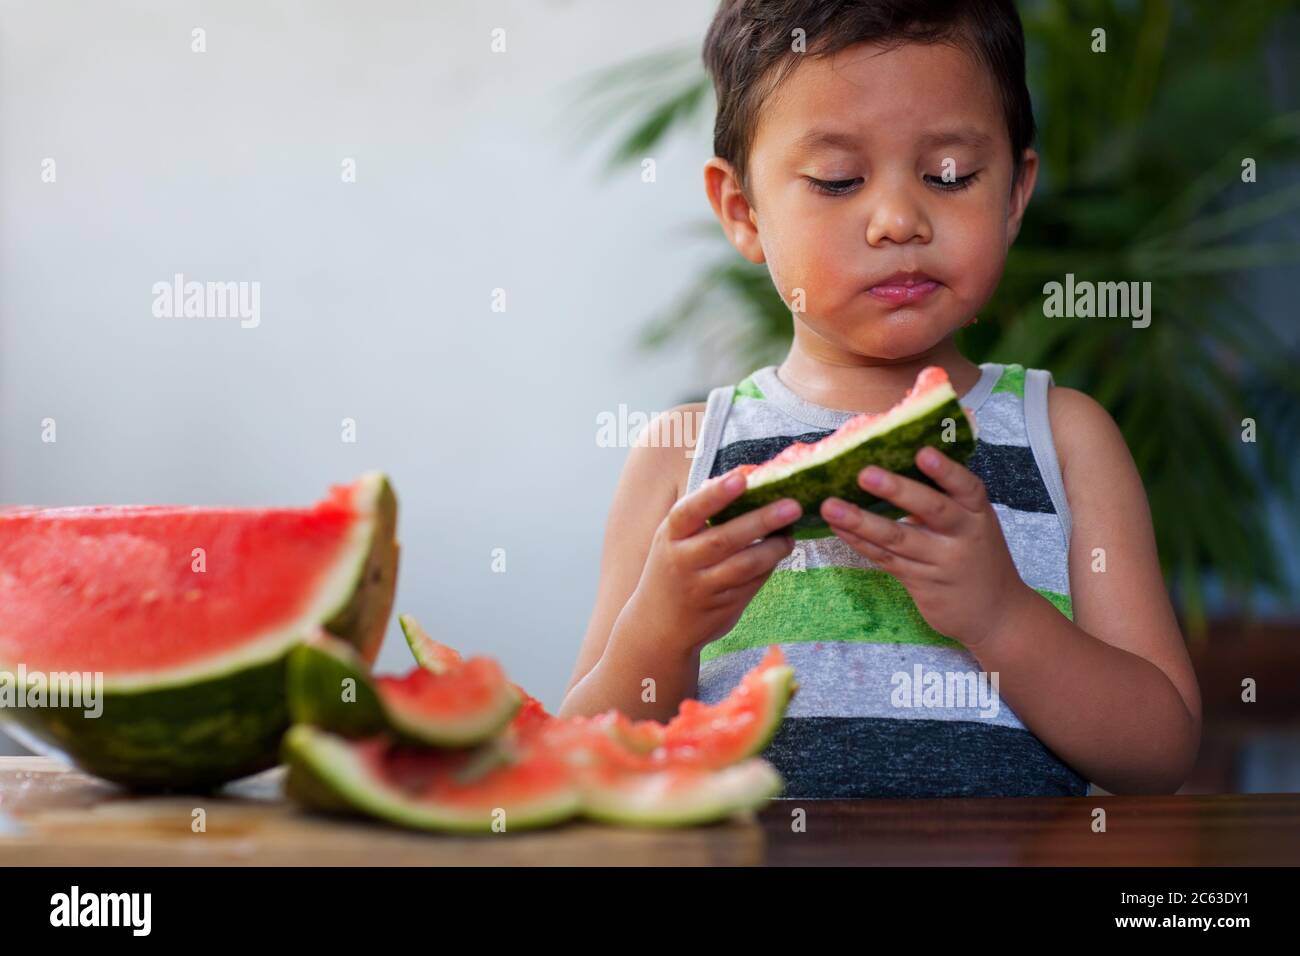 Little kid eating refreshing watermelon slices, cut into kid-friendly wedges, during summer. Stock Photo